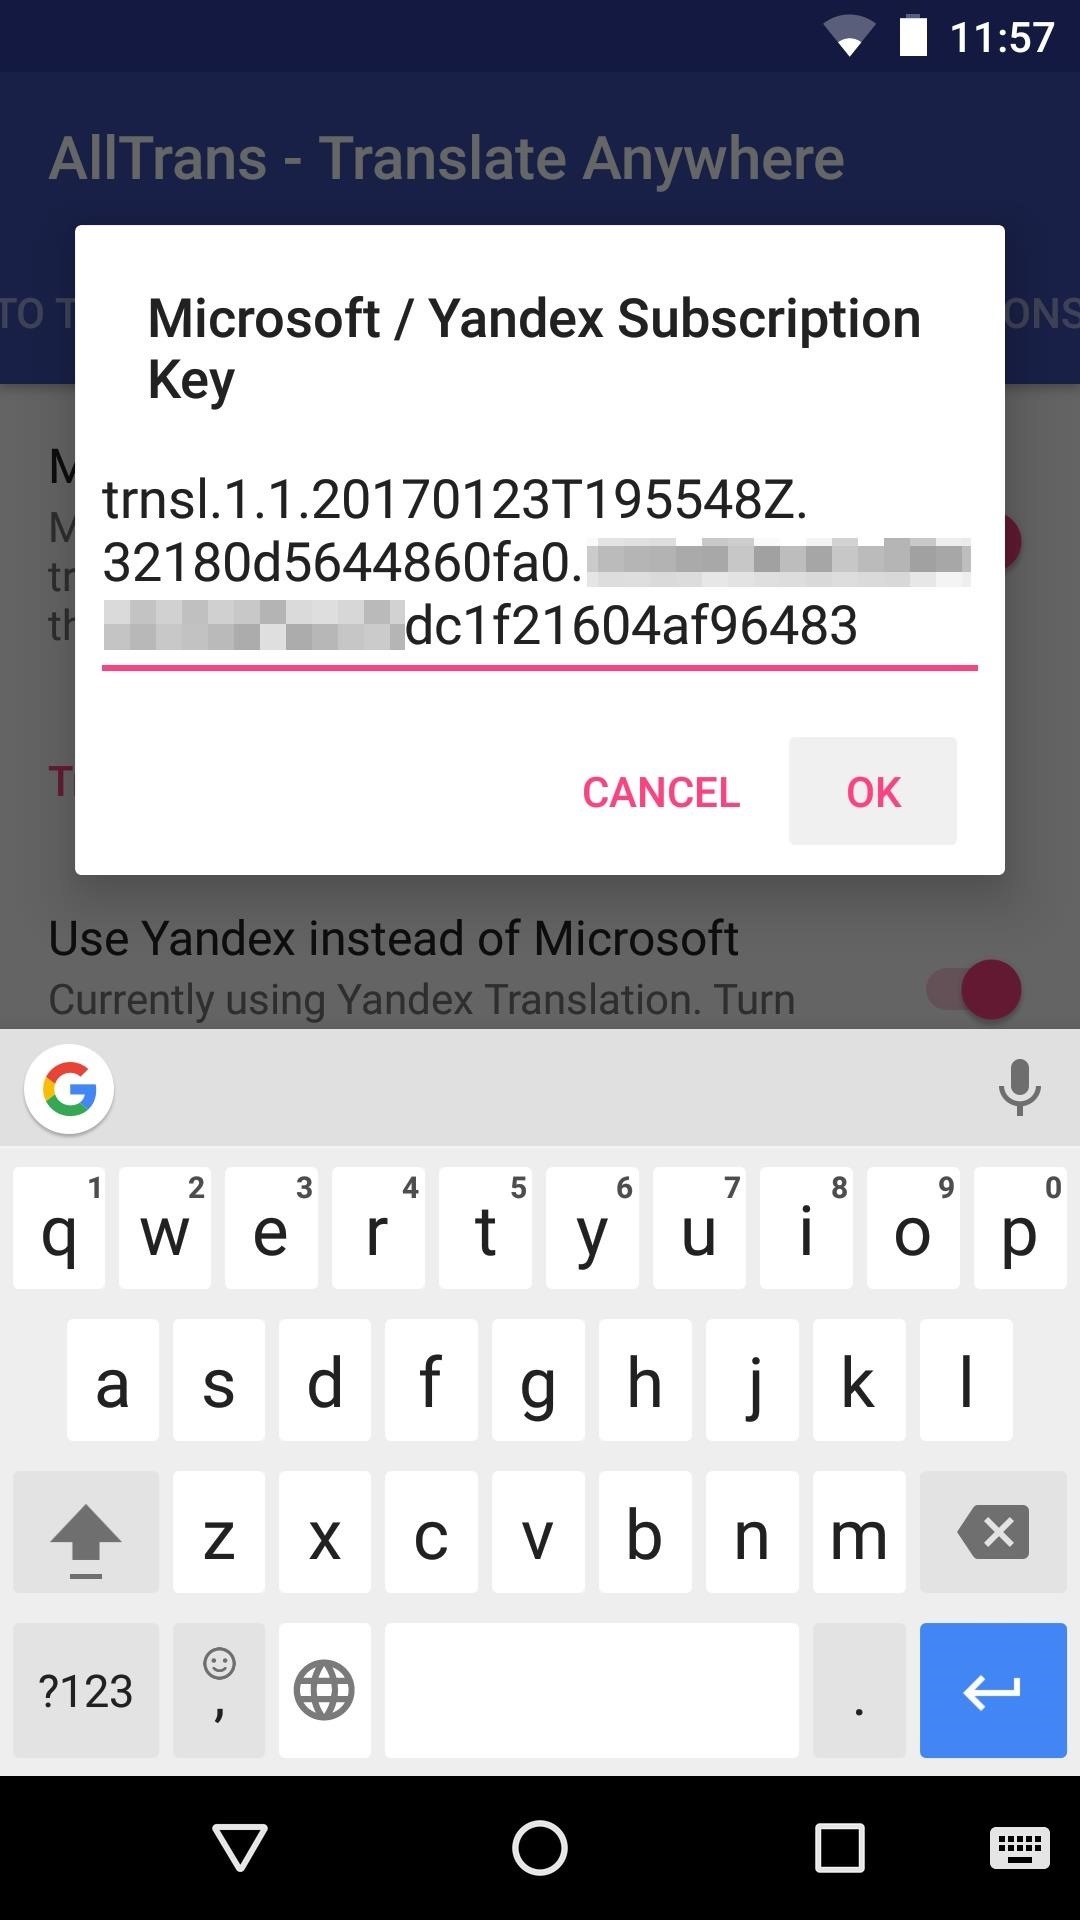 Automatically Translate Any Android App into Any Language